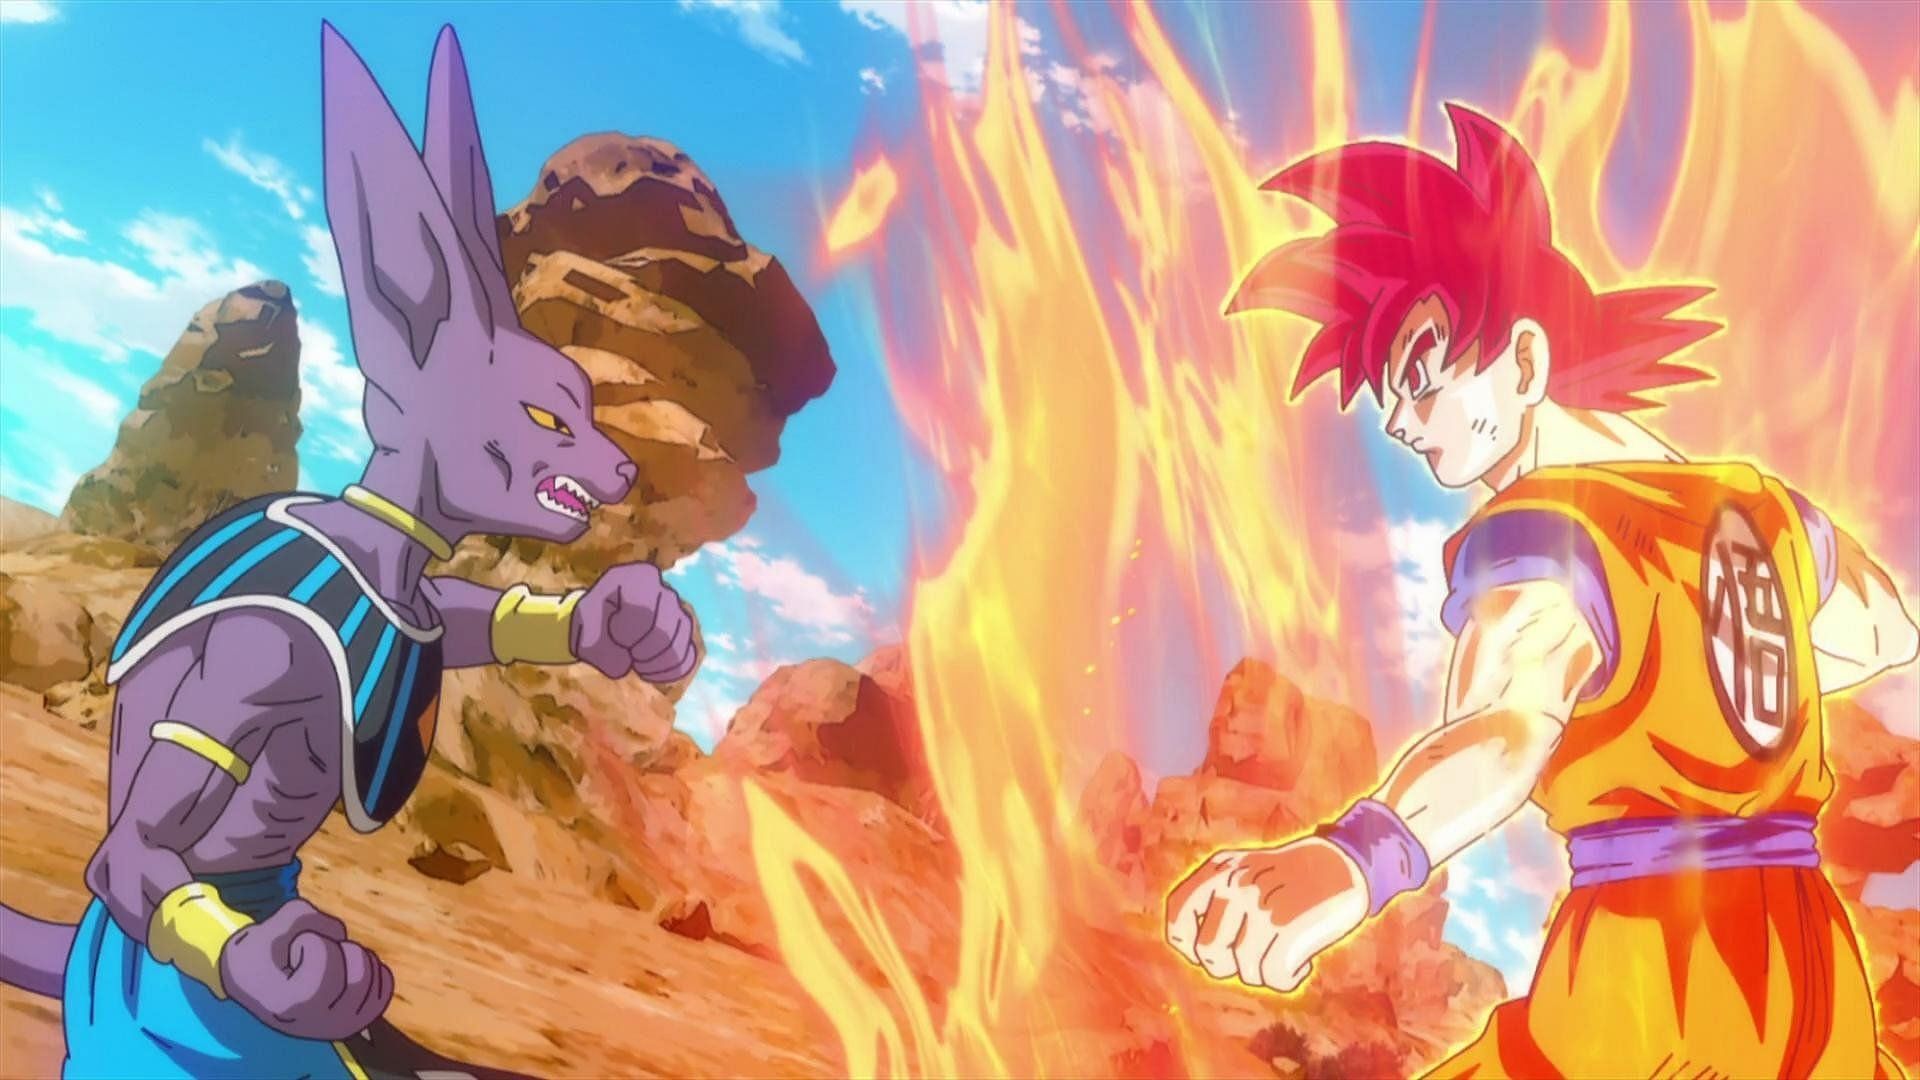 Dragon Ball Super anime confirmed to return in 2023